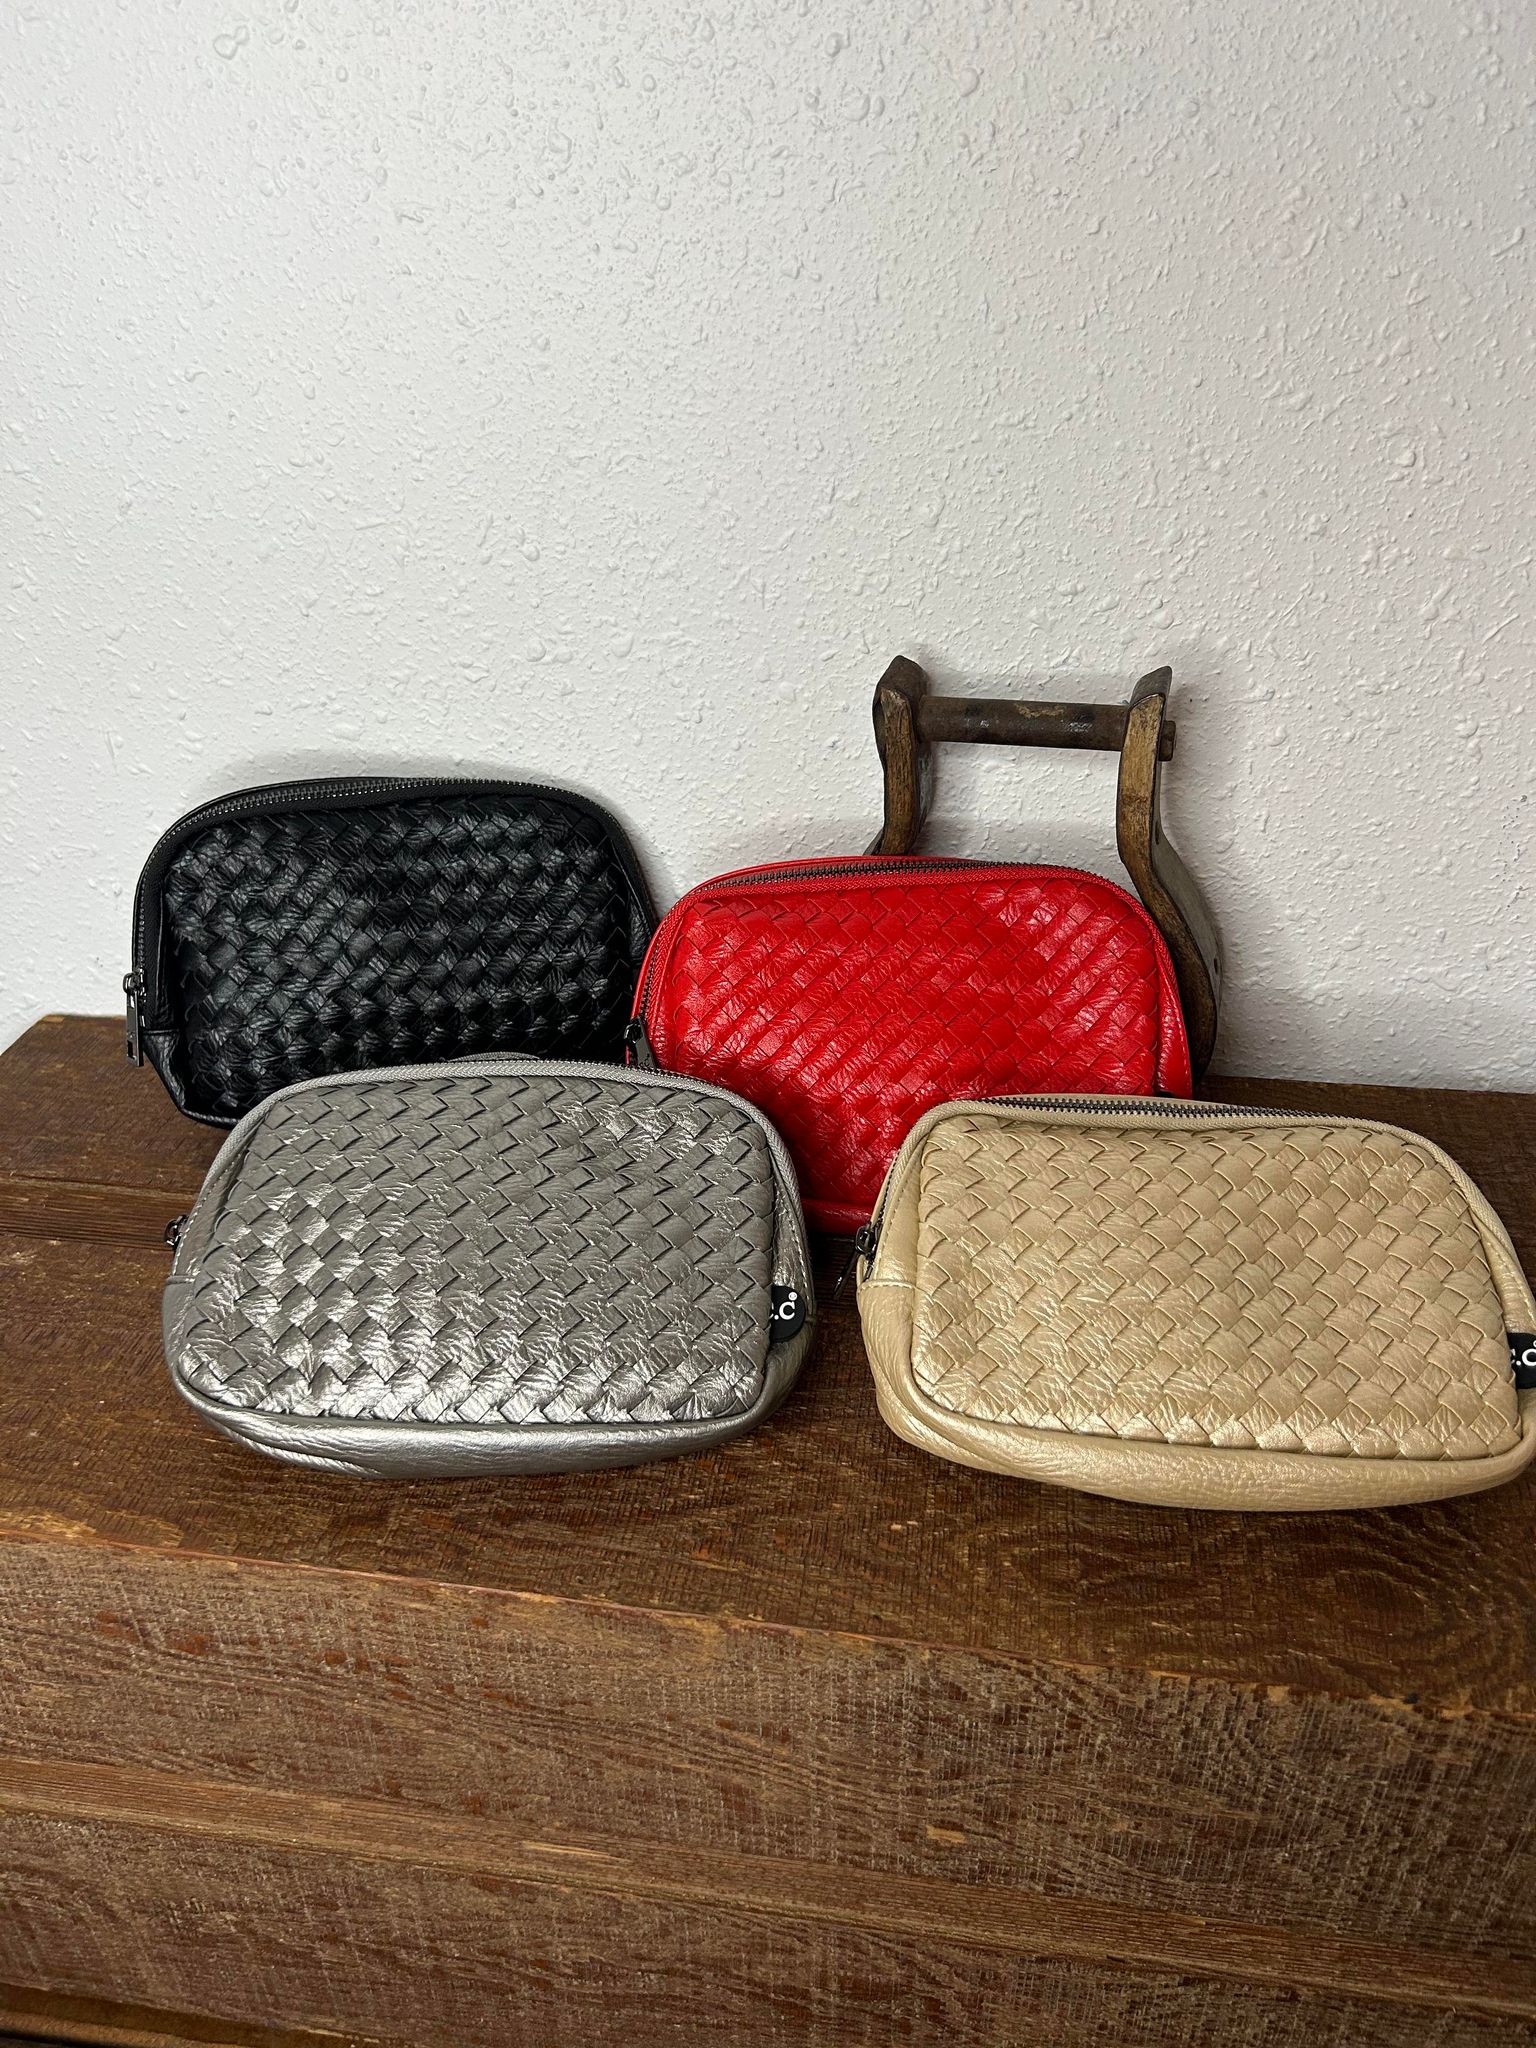 C.C Woven Faux Leather Belt Bags-Handbags-C.C Beanies-Lucky J Boots & More, Women's, Men's, & Kids Western Store Located in Carthage, MO